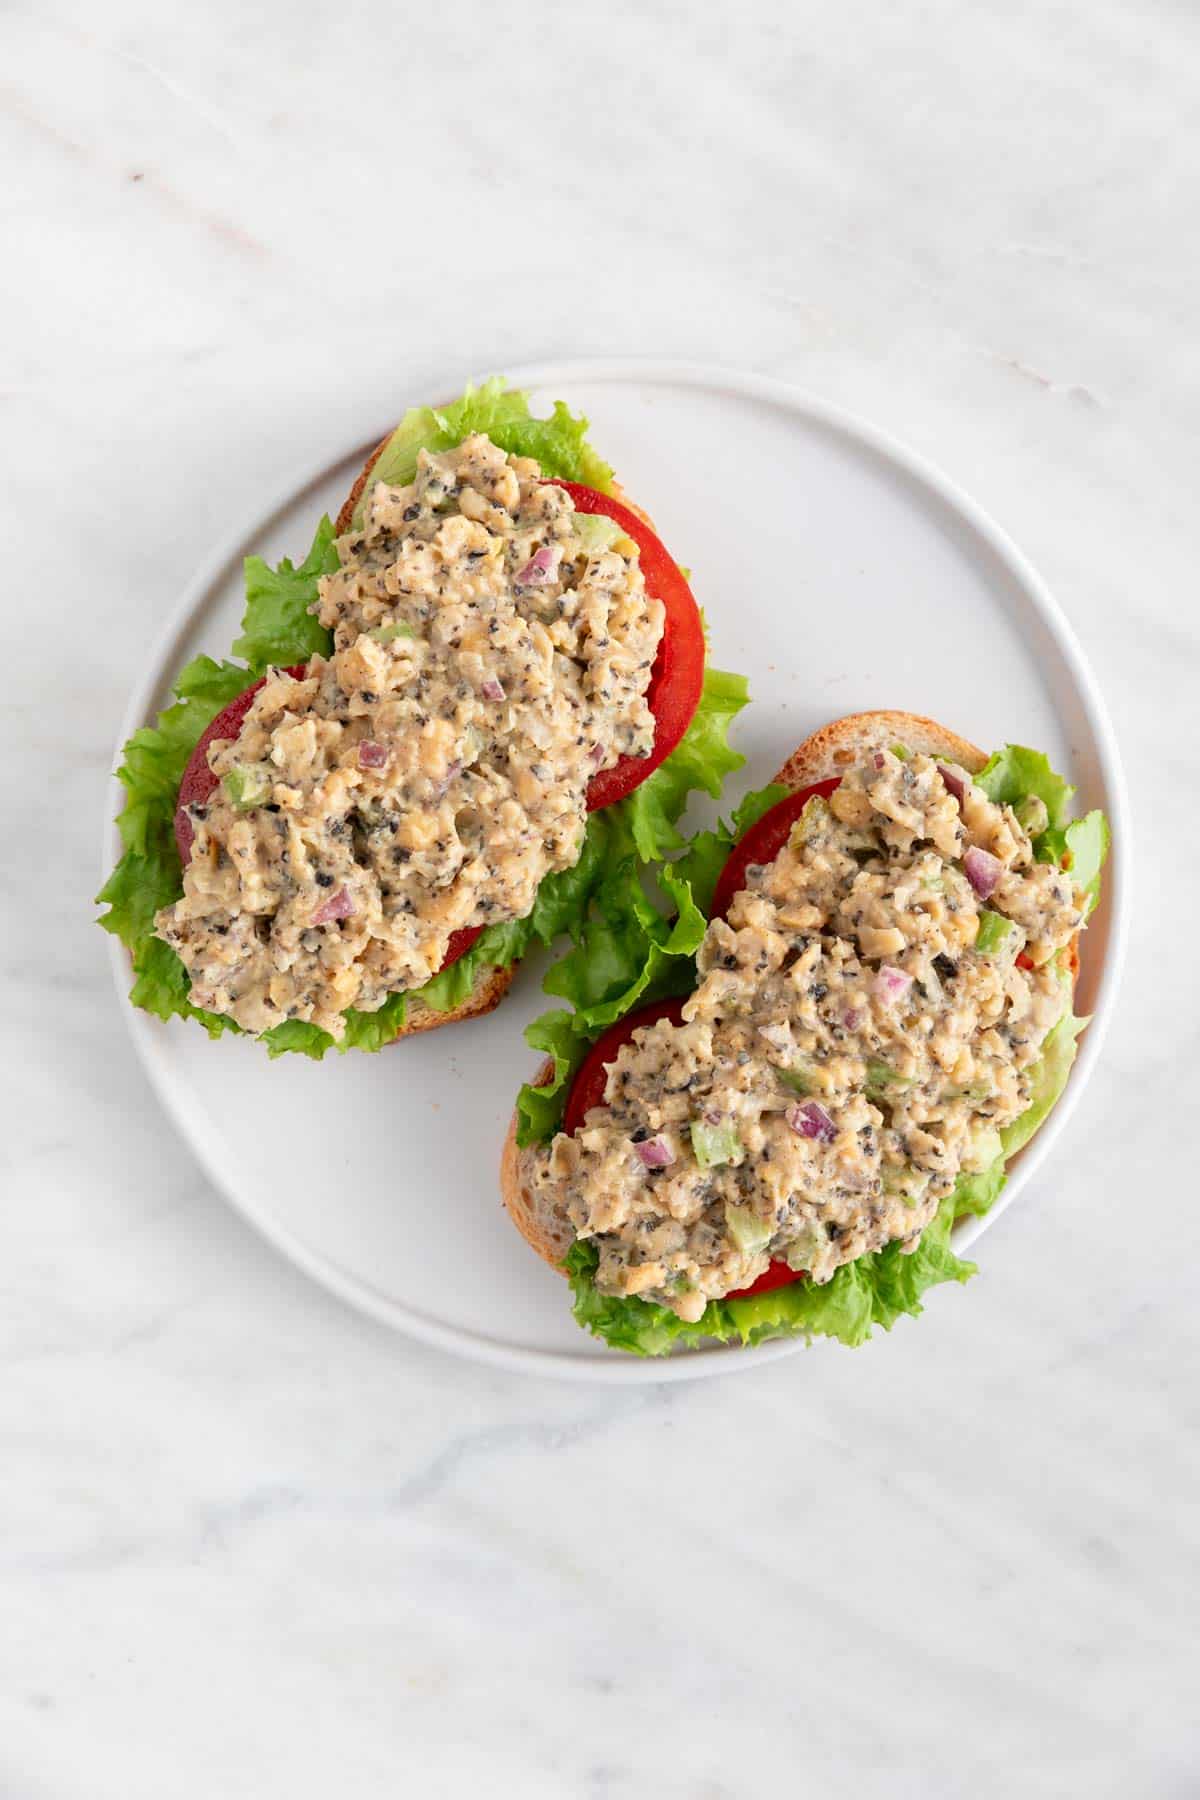 Two slices of bread with vegan tuna, lettuce, and tomato slices.